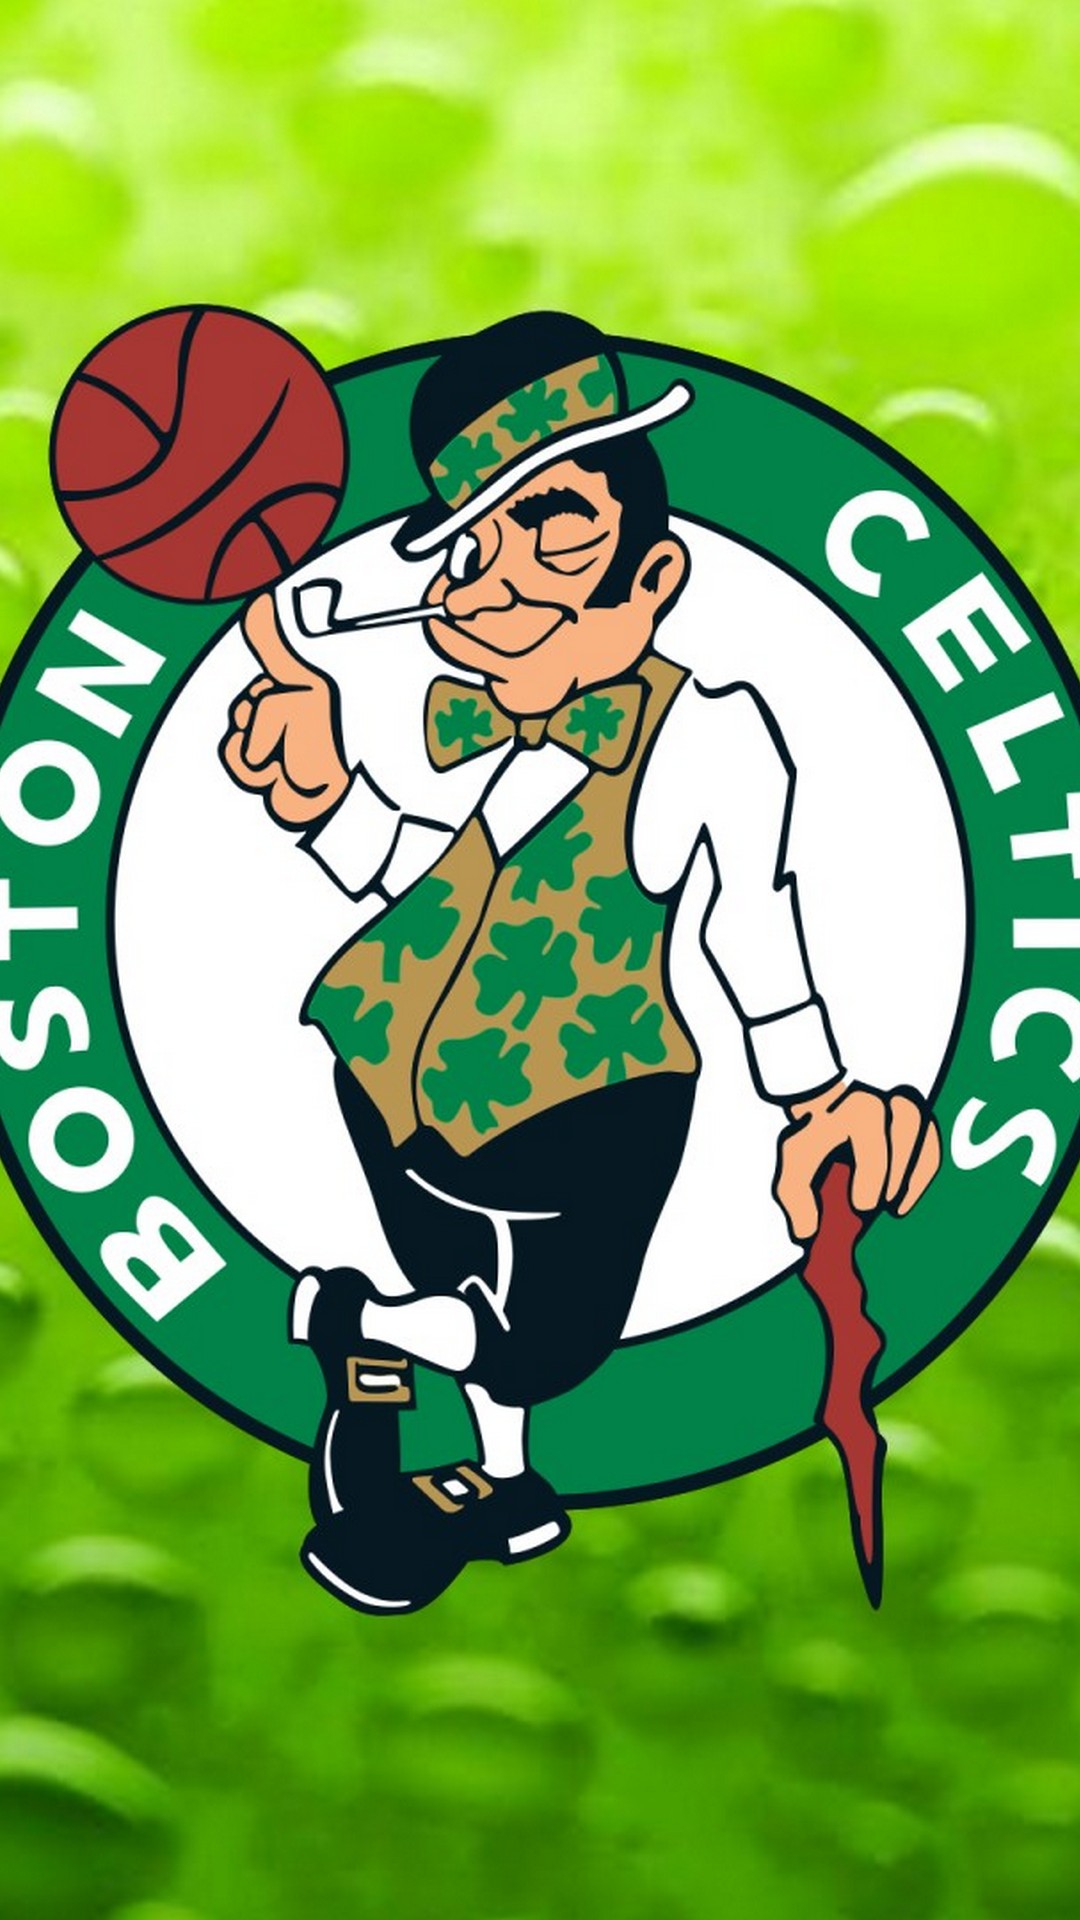 Boston Celtics Wallpaper For Phone with image resolution 1080x1920 pixel. You can make this wallpaper for your Desktop Computer Backgrounds, Mac Wallpapers, Android Lock screen or iPhone Screensavers